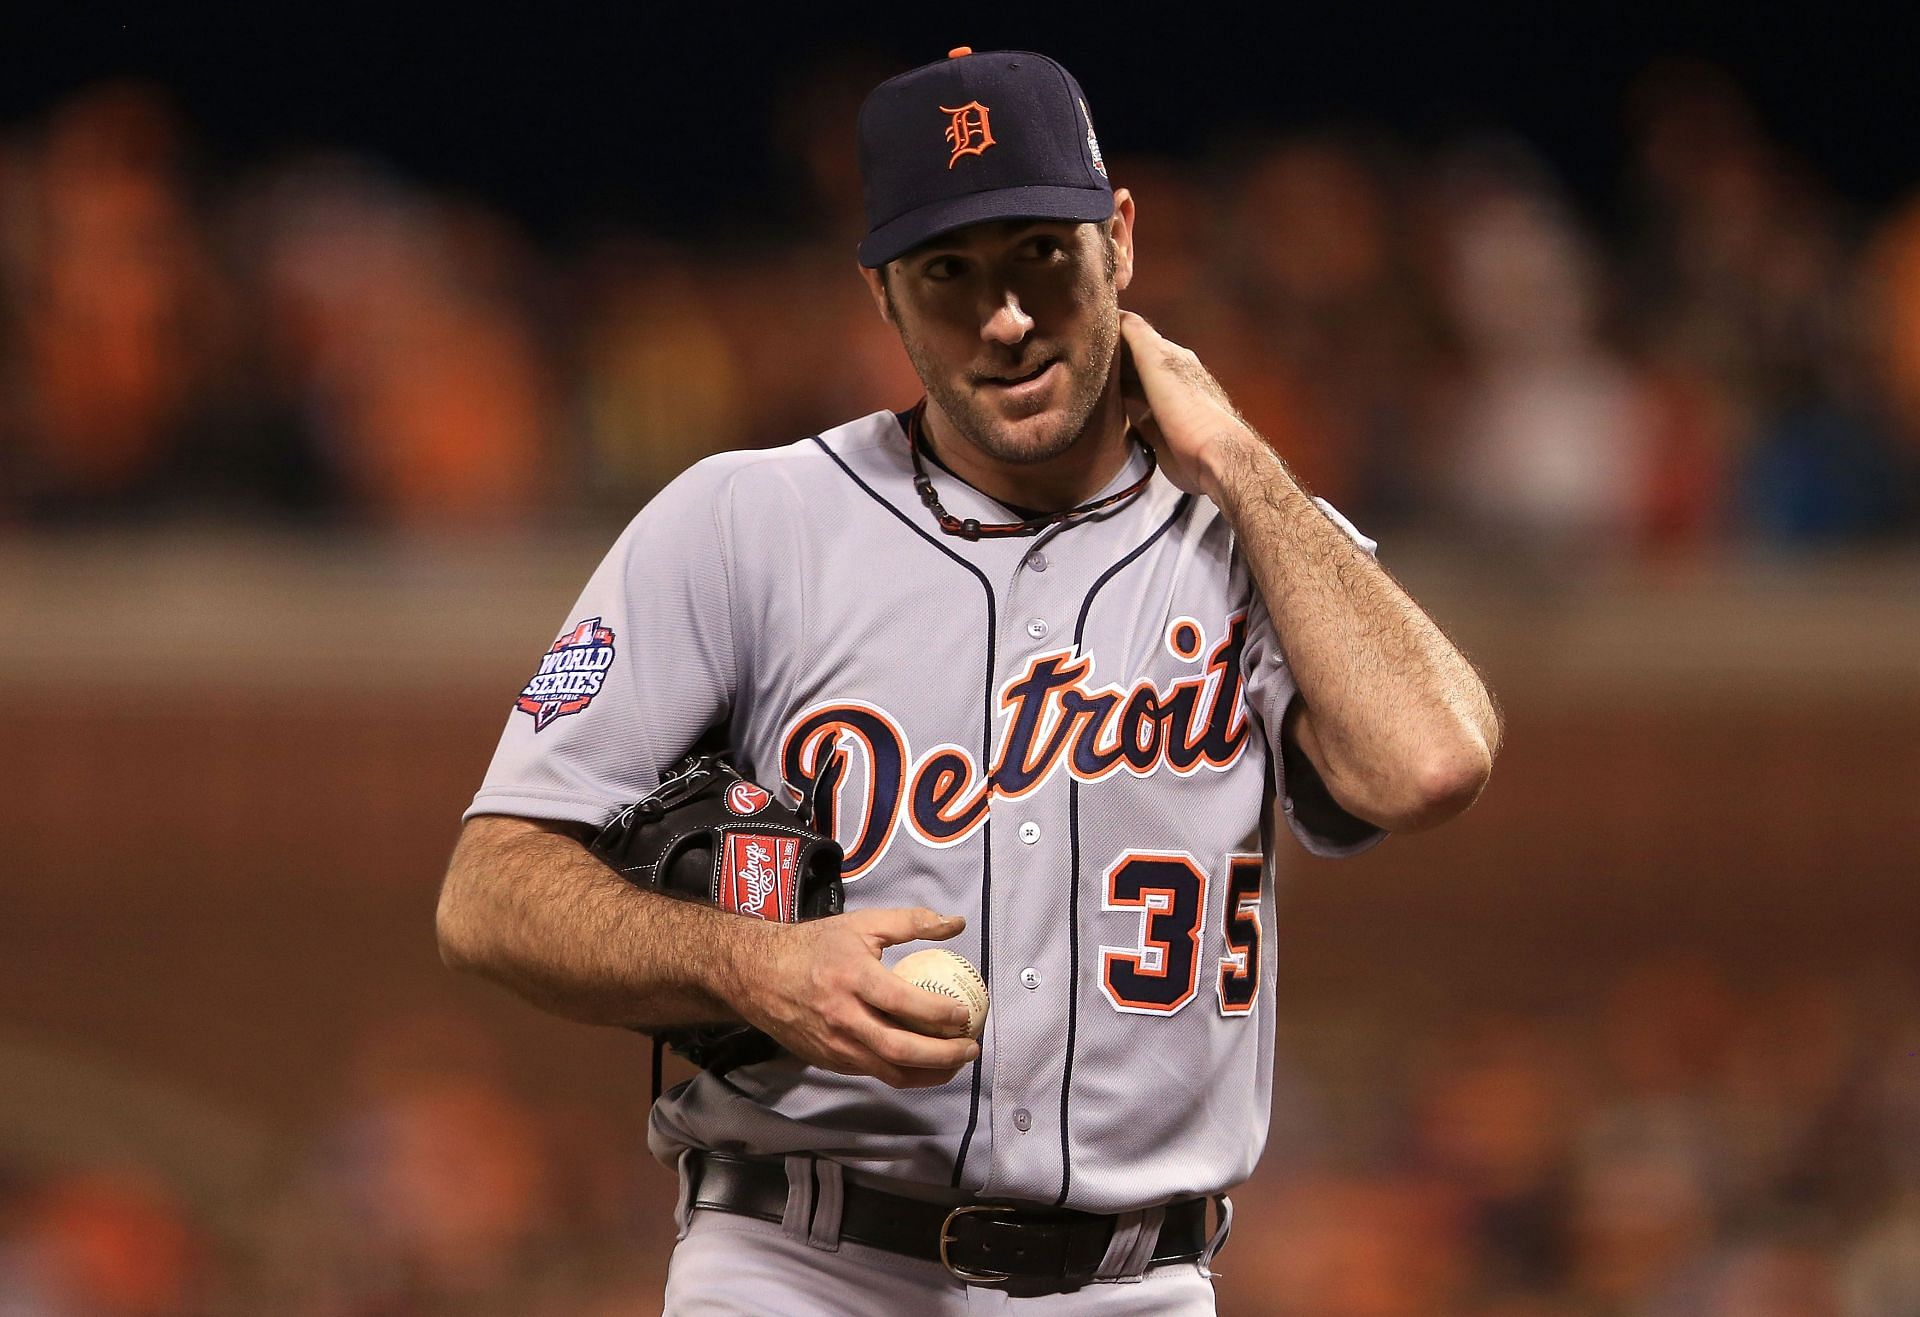 Verlander in the World Series during his time with the Detroit Tigers.